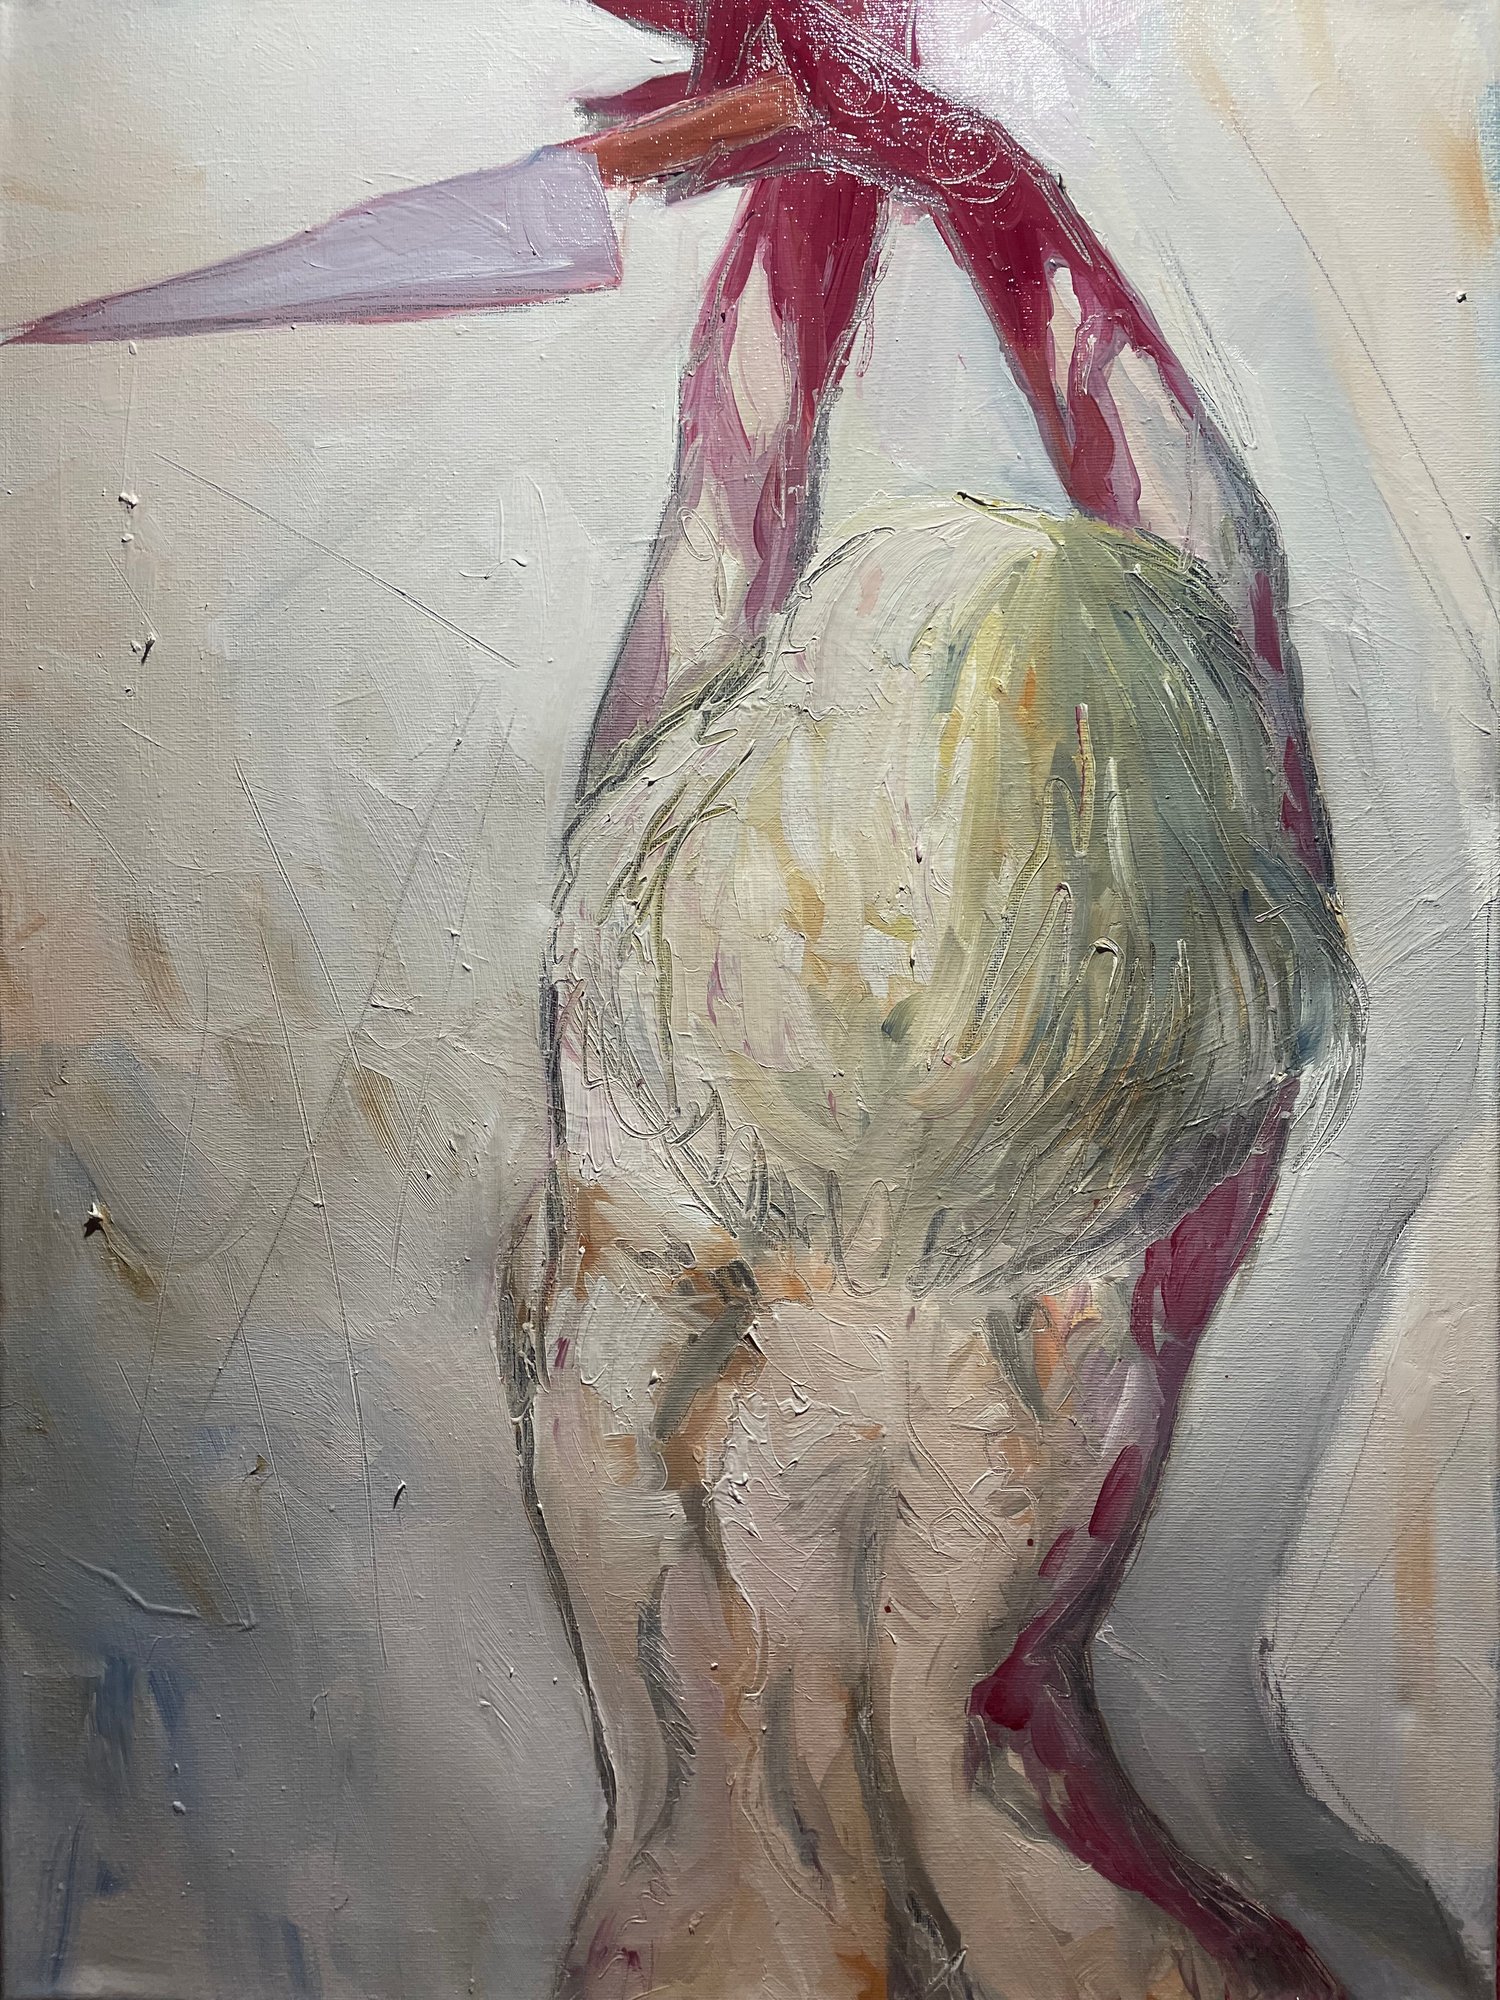 Daily painting - The Victory